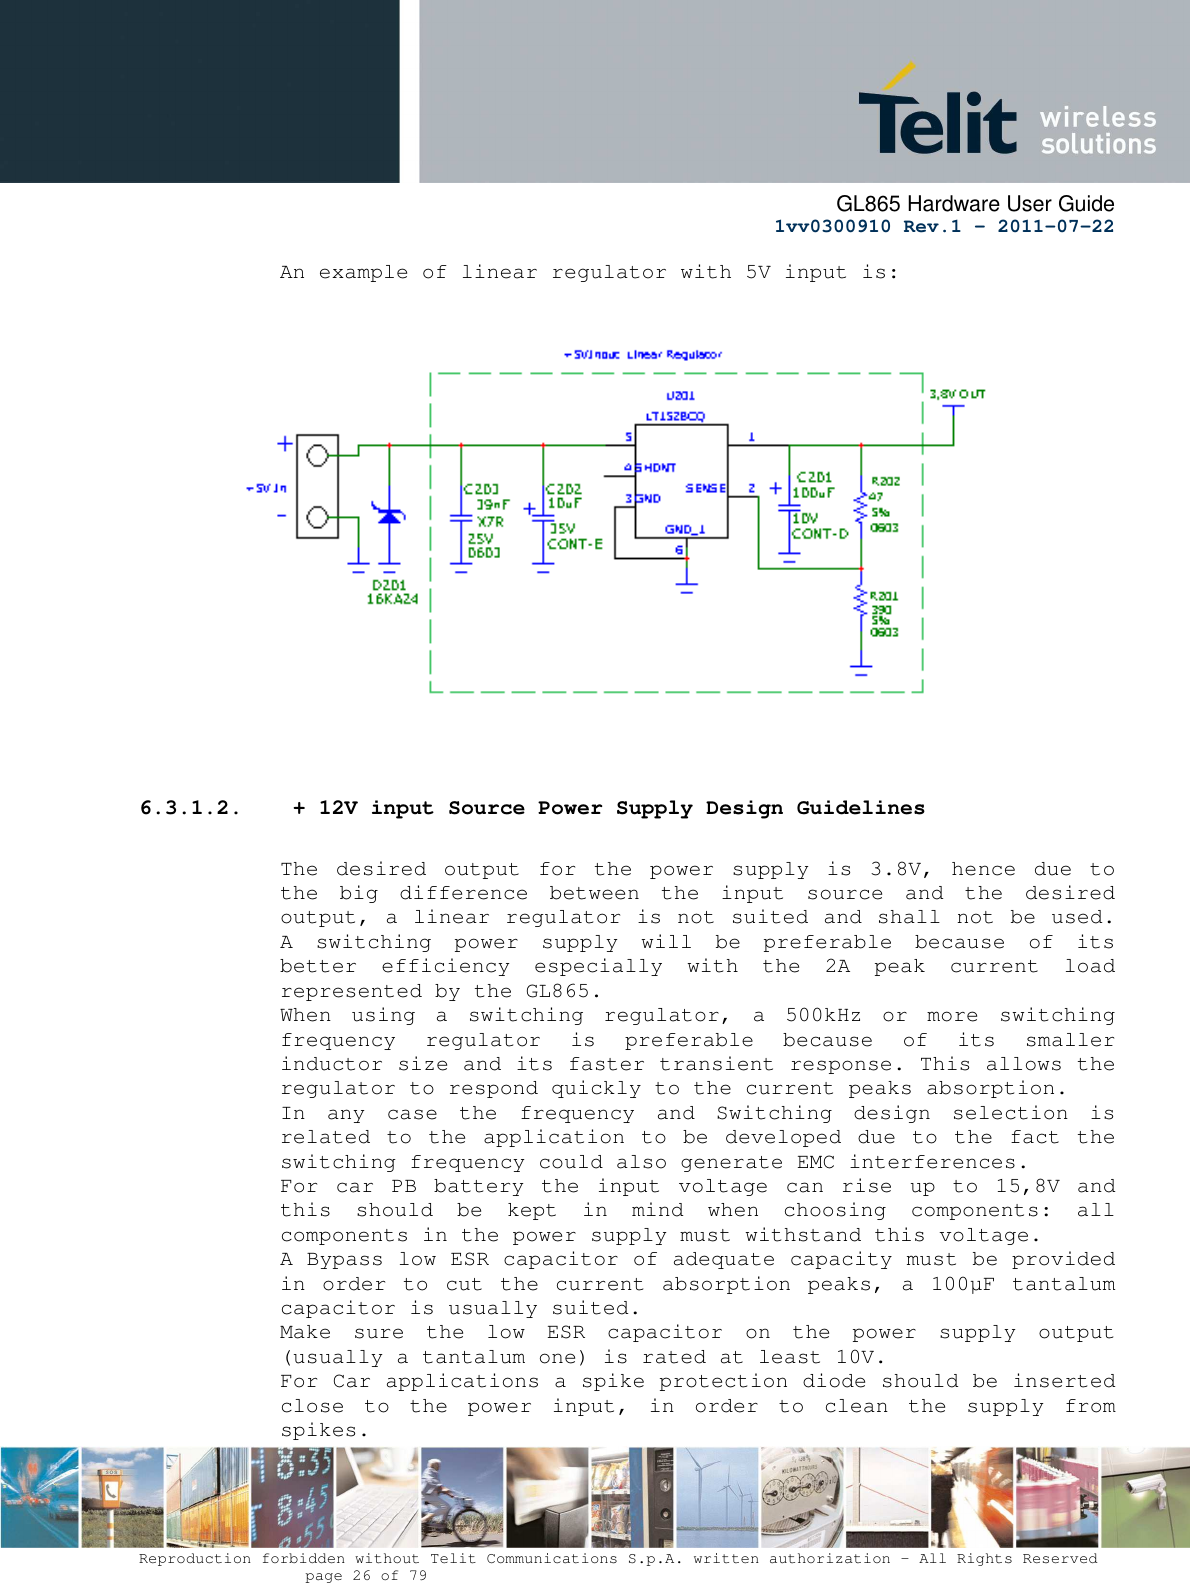      GL865 Hardware User Guide     1vv0300910 Rev.1 – 2011-07-22       Reproduction forbidden without Telit Communications S.p.A. written authorization - All Rights Reserved    page 26 of 79  An example of linear regulator with 5V input is:                     6.3.1.2.  + 12V input Source Power Supply Design Guidelines  The  desired  output  for  the  power  supply  is  3.8V,  hence  due  to the  big  difference  between  the  input  source  and  the  desired output, a linear regulator is not suited and shall not be used. A  switching  power  supply  will  be  preferable  because  of  its better  efficiency  especially  with  the  2A  peak  current  load represented by the GL865. When  using  a  switching  regulator,  a  500kHz  or  more  switching frequency  regulator  is  preferable  because  of  its  smaller inductor size and its faster transient response. This allows the regulator to respond quickly to the current peaks absorption.  In  any  case  the  frequency  and  Switching  design  selection  is related to the application to  be  developed  due  to  the fact the switching frequency could also generate EMC interferences. For  car  PB  battery  the  input  voltage  can  rise  up  to  15,8V  and this  should  be  kept  in  mind  when  choosing  components:  all components in the power supply must withstand this voltage. A Bypass low ESR capacitor of adequate capacity must be provided in  order to  cut  the  current absorption  peaks,  a  100µF  tantalum capacitor is usually suited. Make  sure  the  low  ESR  capacitor  on  the  power  supply  output (usually a tantalum one) is rated at least 10V. For Car applications a spike protection diode should be inserted close  to  the  power  input,  in  order  to  clean  the  supply  from spikes.  